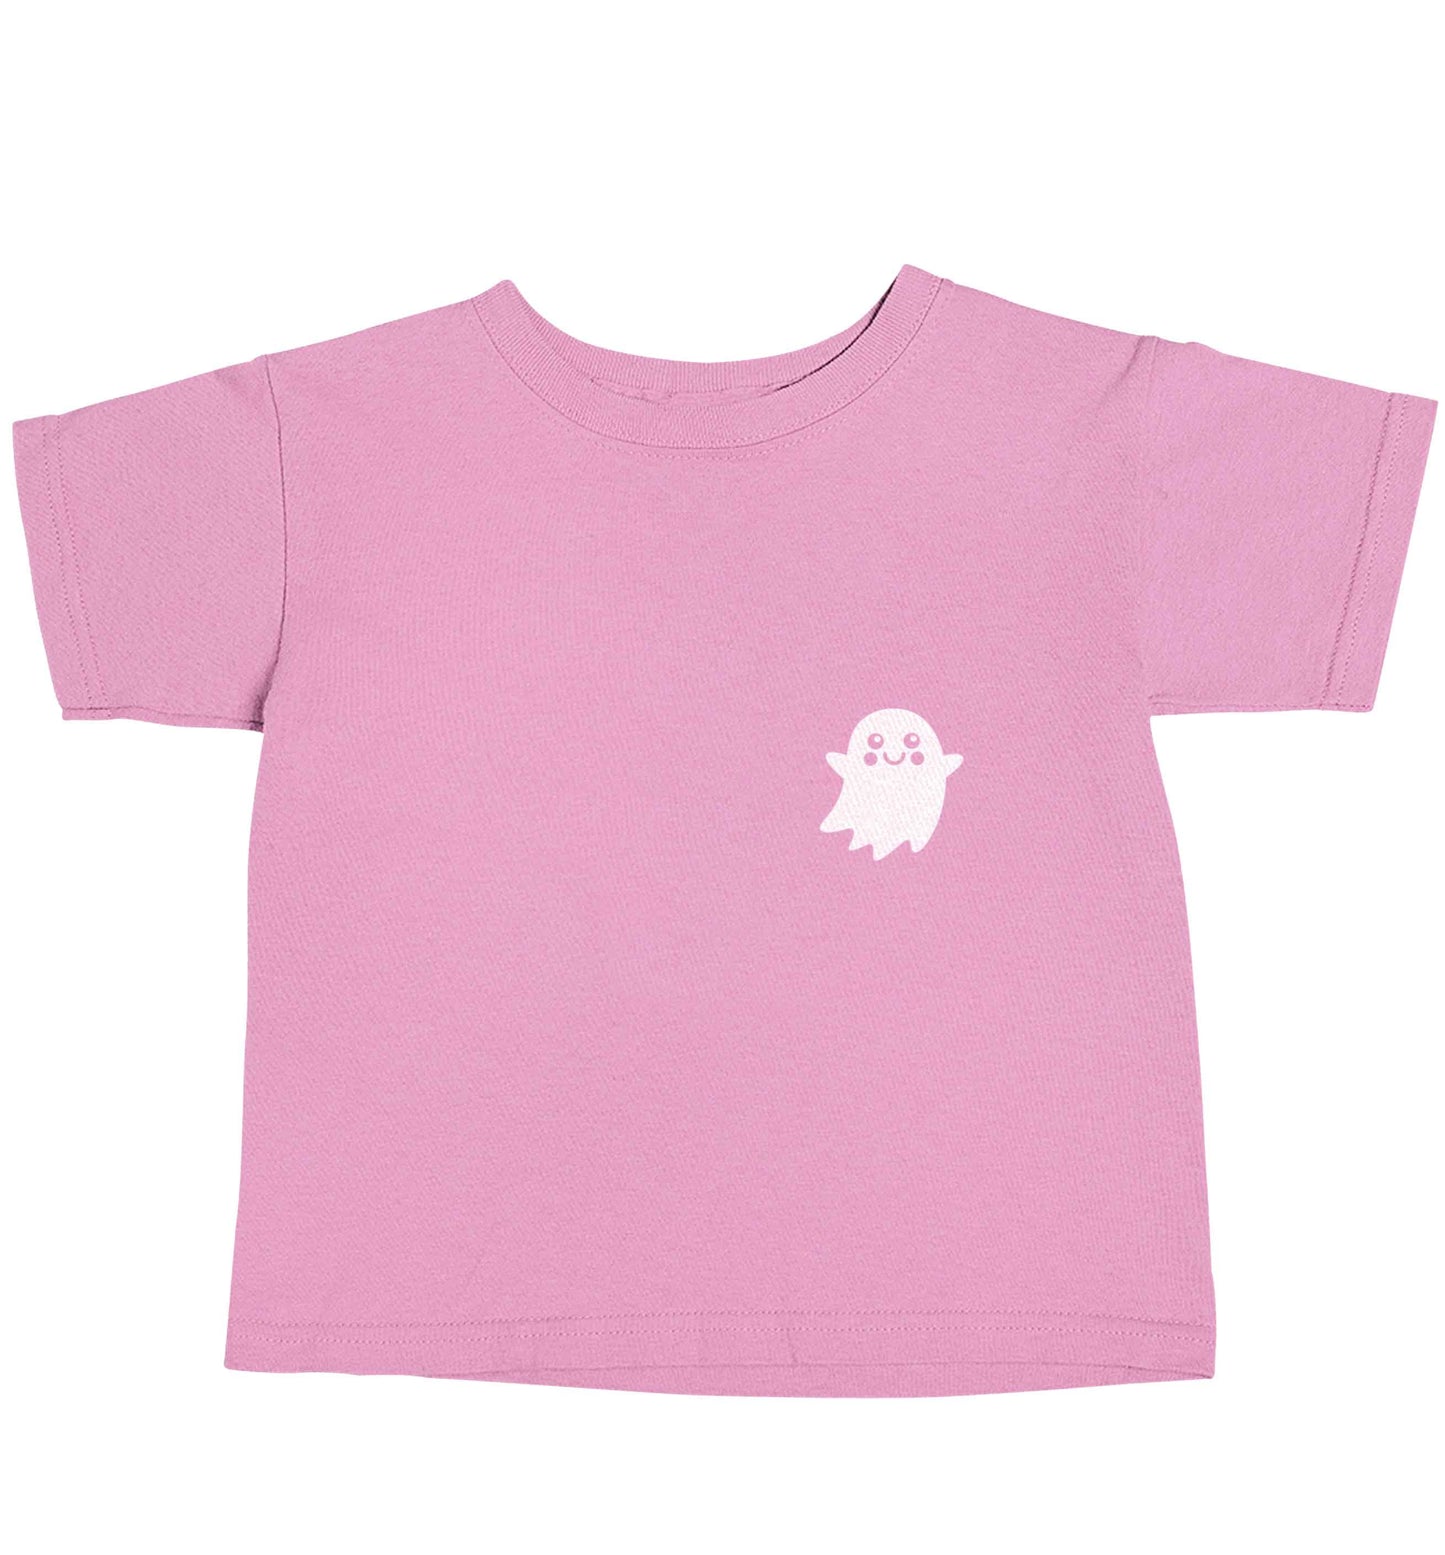 Pocket ghost light pink baby toddler Tshirt 2 Years